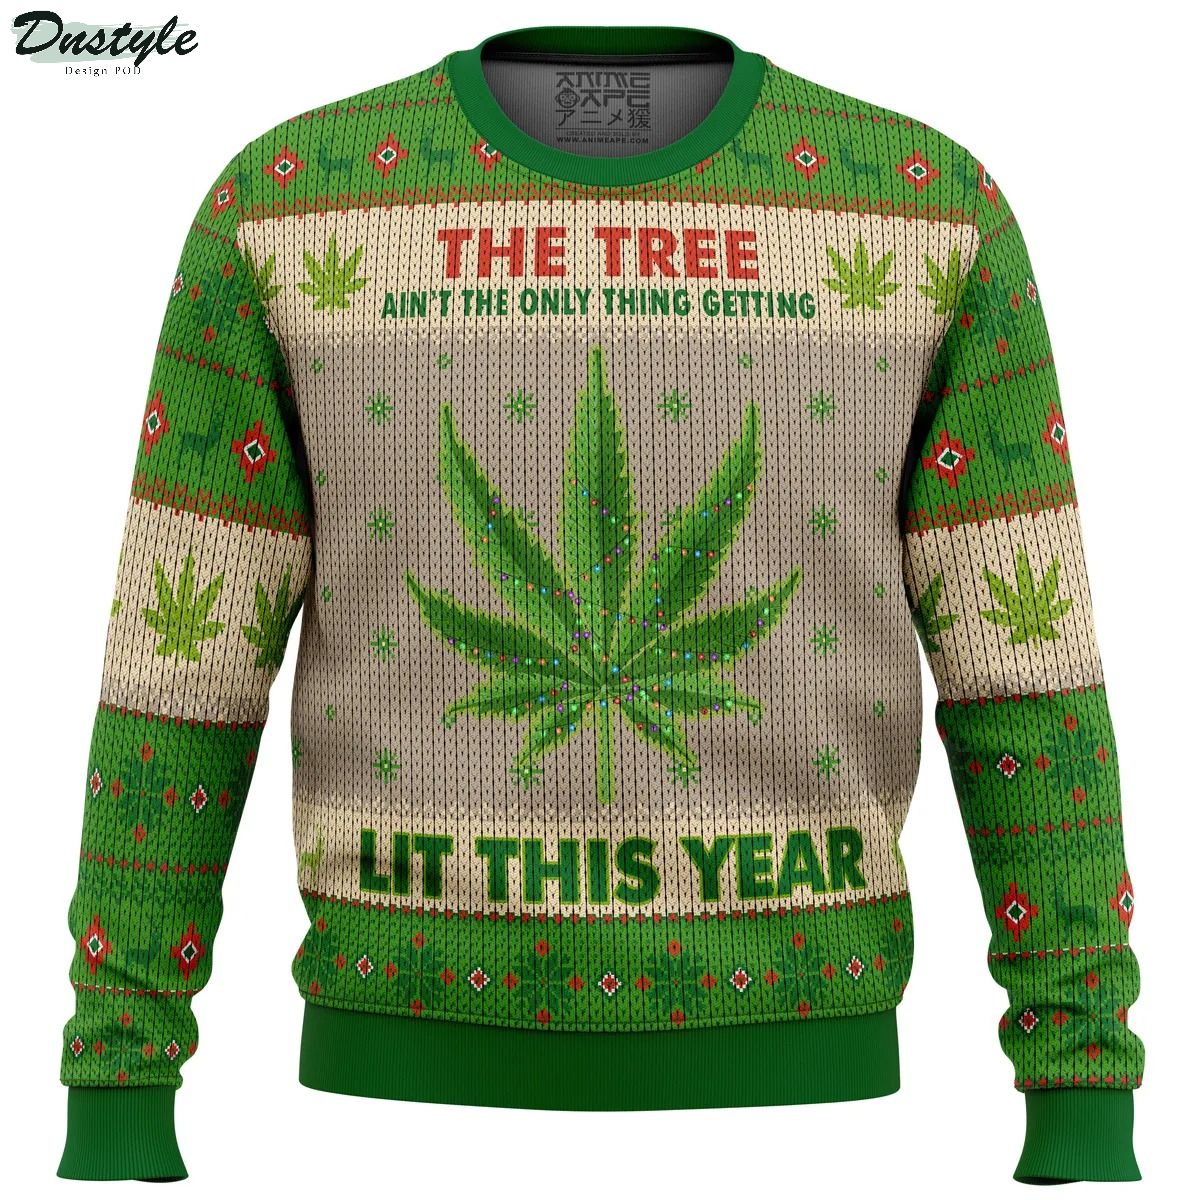 Lit This Year Weed Ugly Christmas Sweater